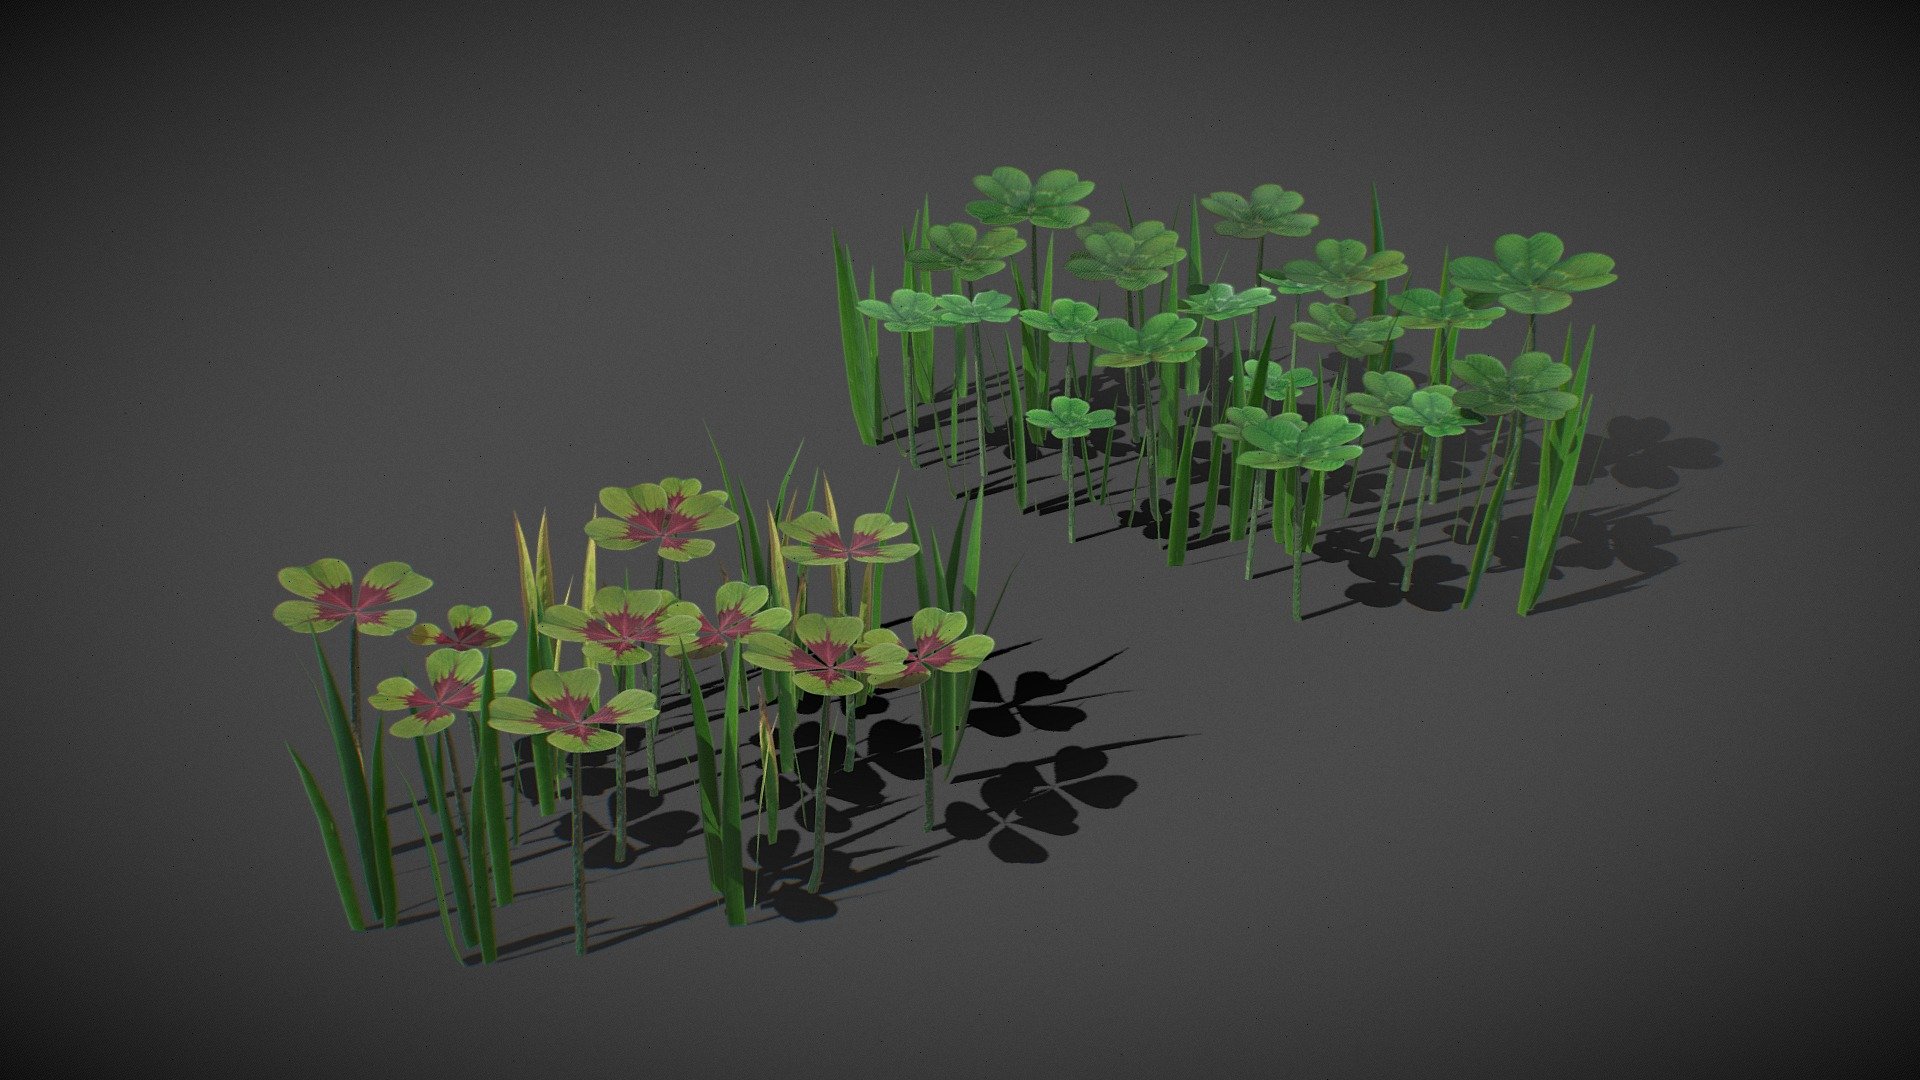 Low poly asset perfectly optimized and mapped to represent a higher polygon density. You can use it in VR, smartphone games, or environments where few polygons are needed. Intended for use in graphics engines such as Unity and Unreal Engine, with the current configuration of PBR materials.

This prop belongs to an vegetation theme pack, if you need a specific prop let us know and we will add it for sale.

Developed by Outlier Spa 3d model